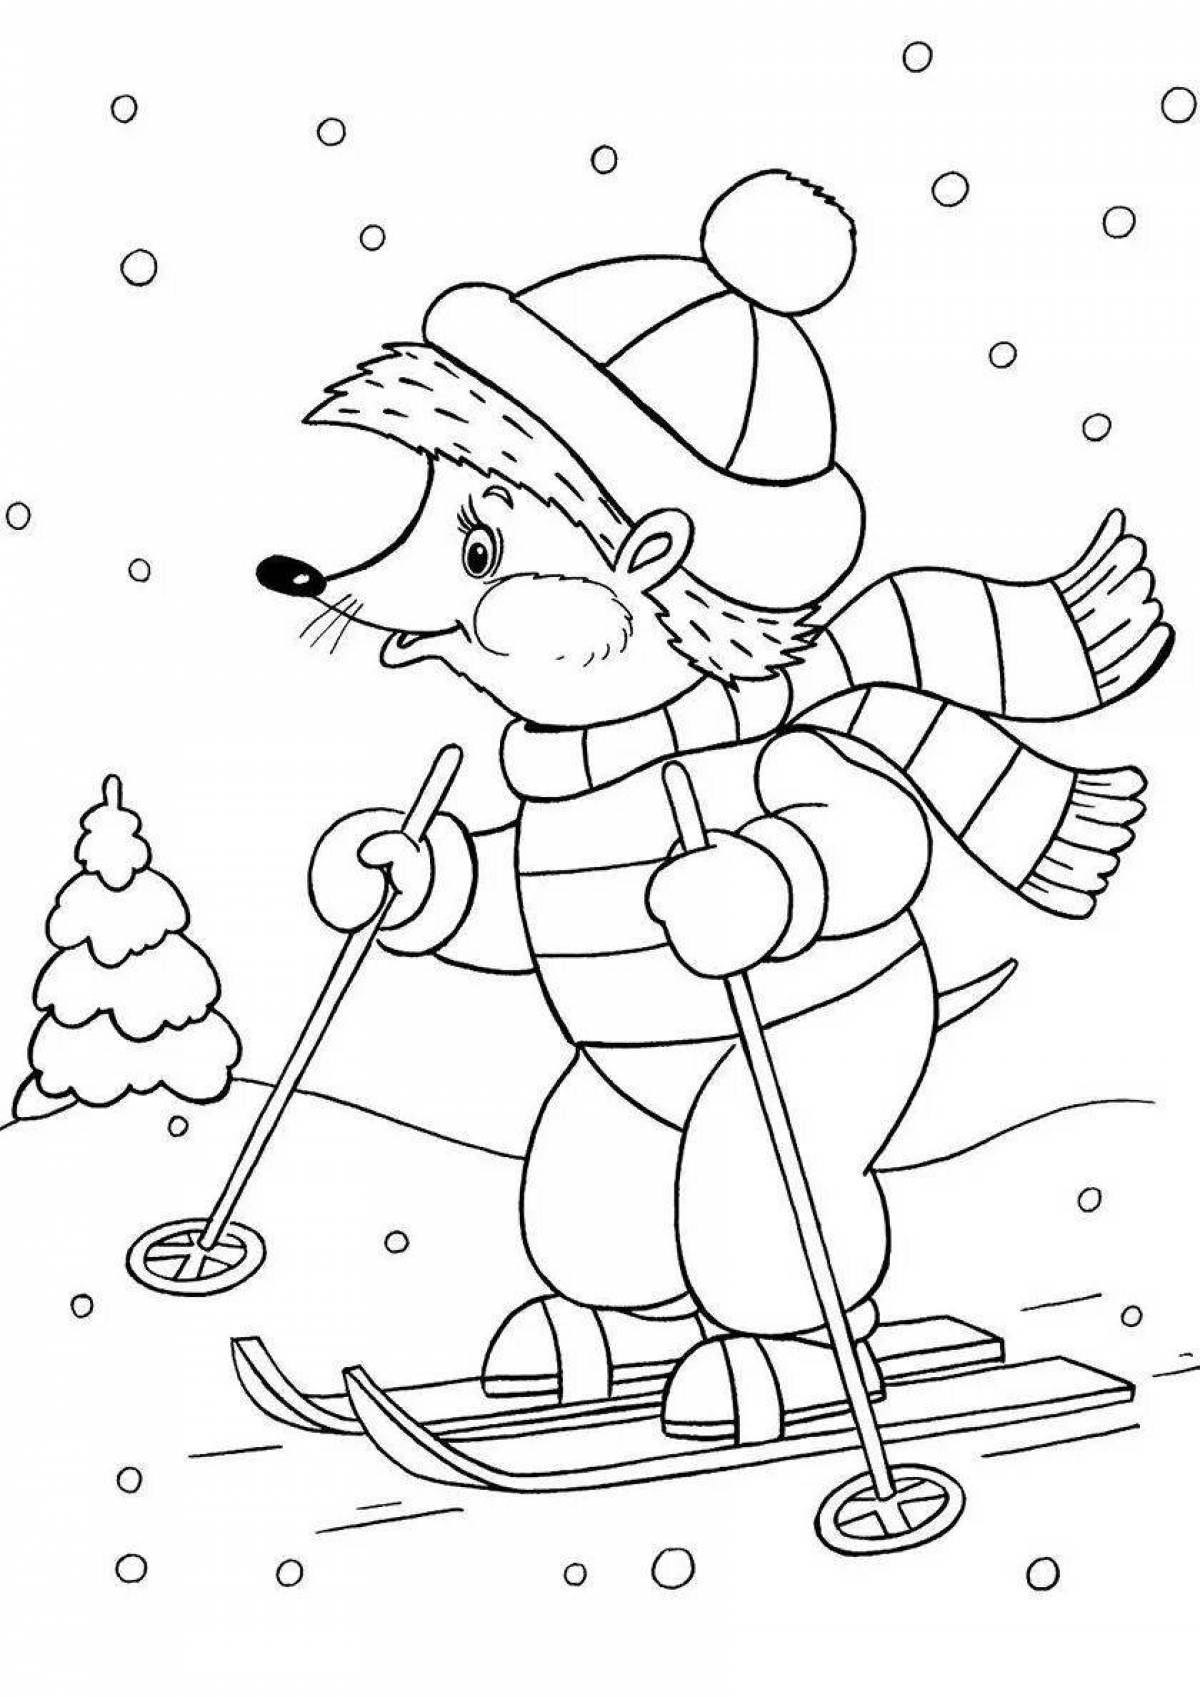 Holiday coloring book for children 3 years old winter